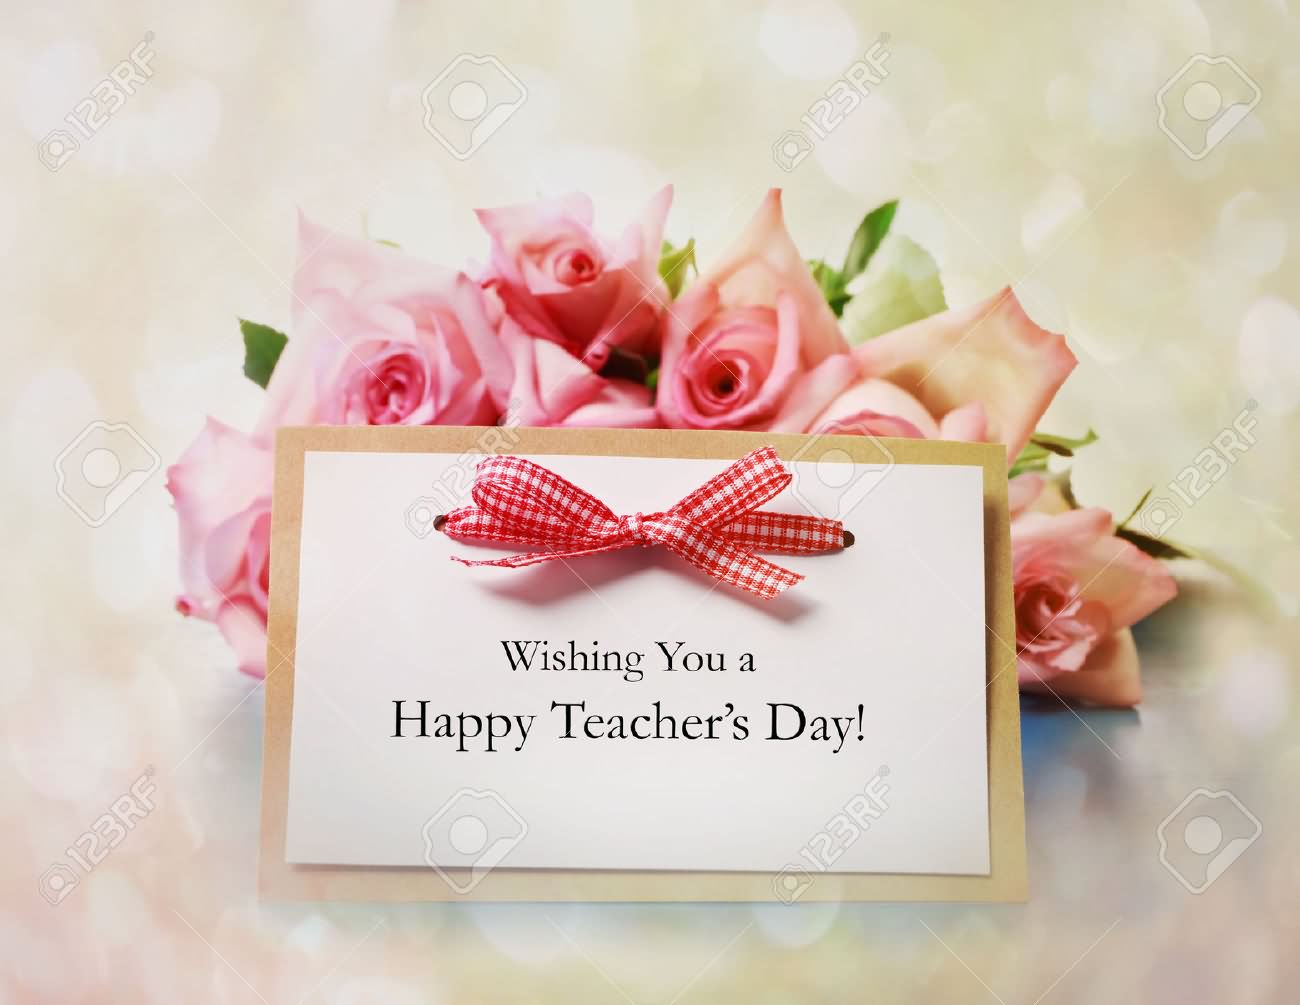 Wishing You A Happy Teacher’s Day Greeting Card